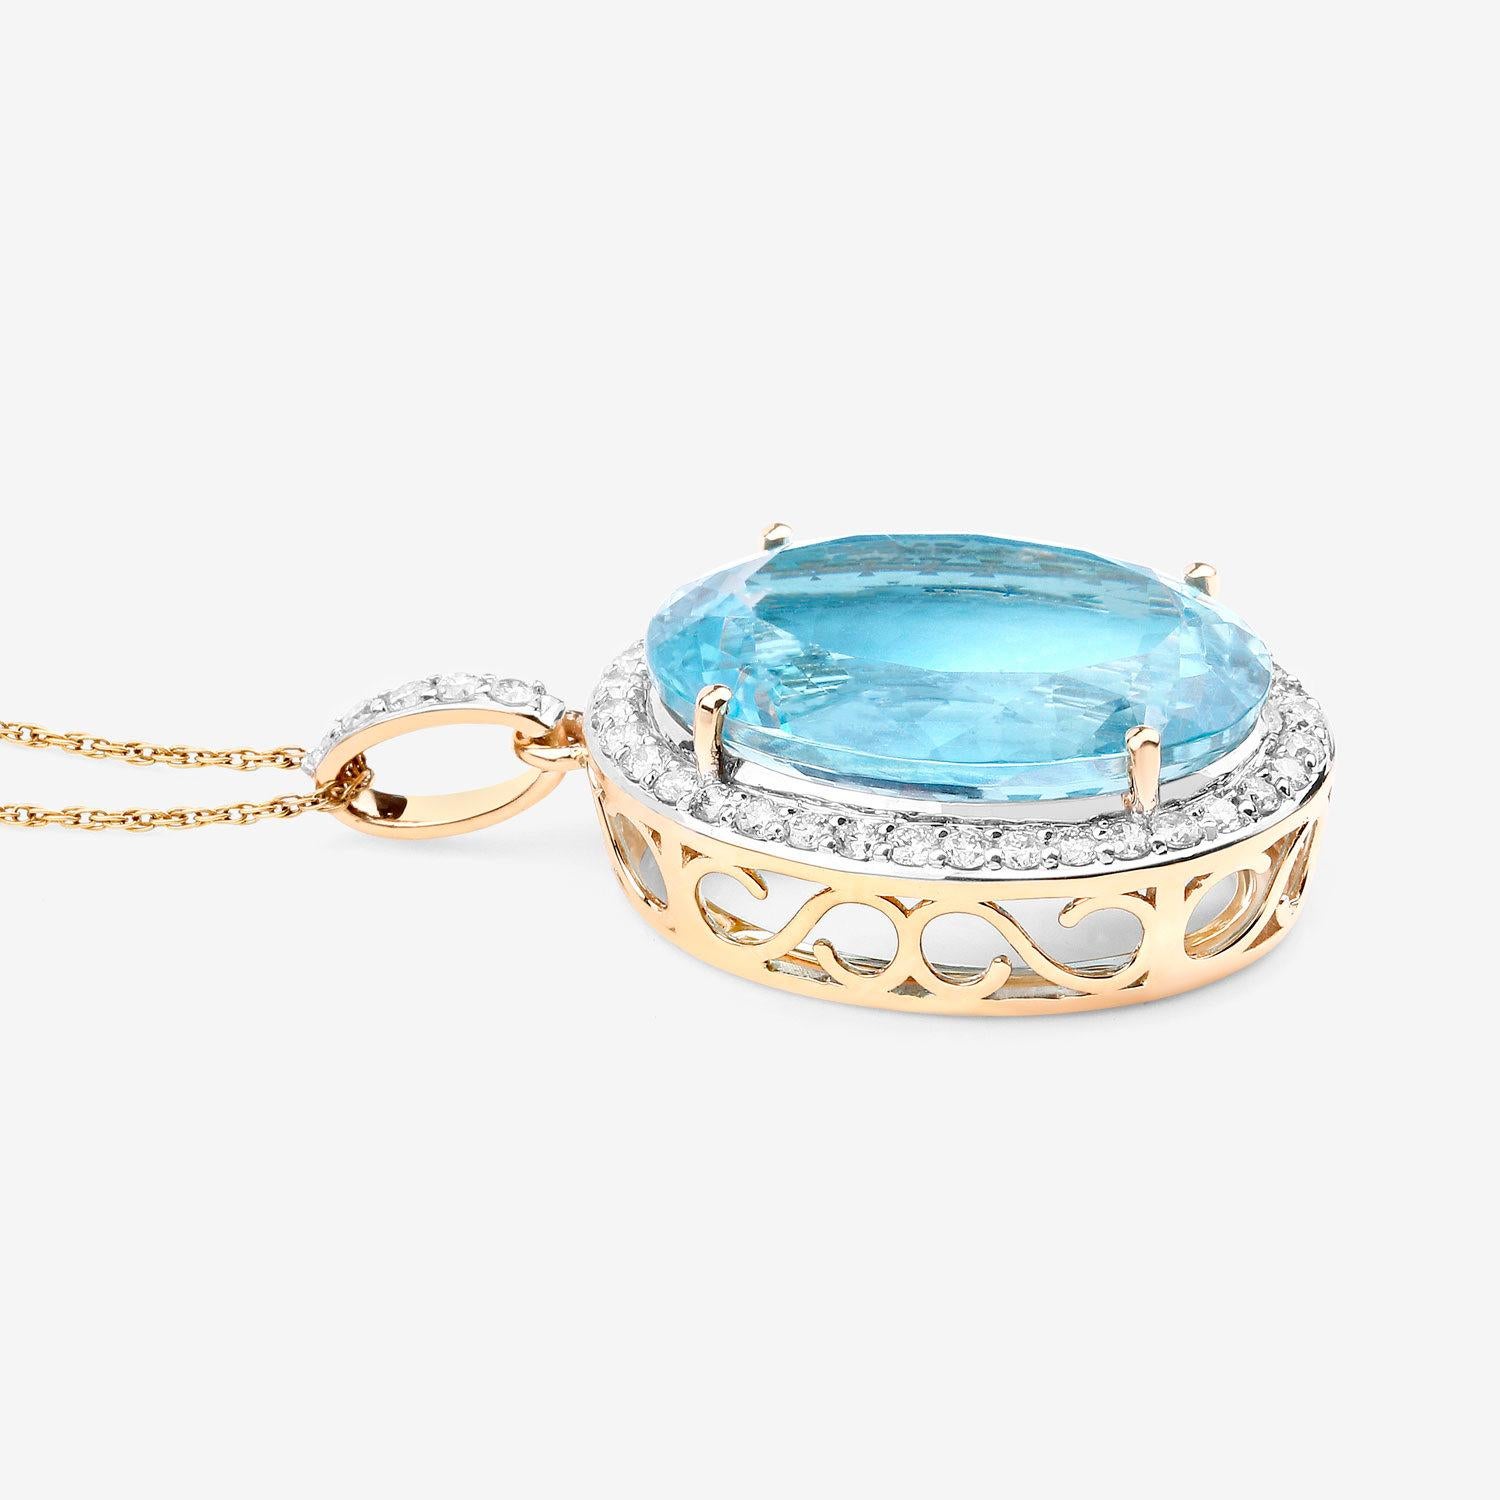 Important Aquamarine Pendant Necklace With Diamonds 13.62 Carats 14K Gold In Excellent Condition For Sale In Laguna Niguel, CA